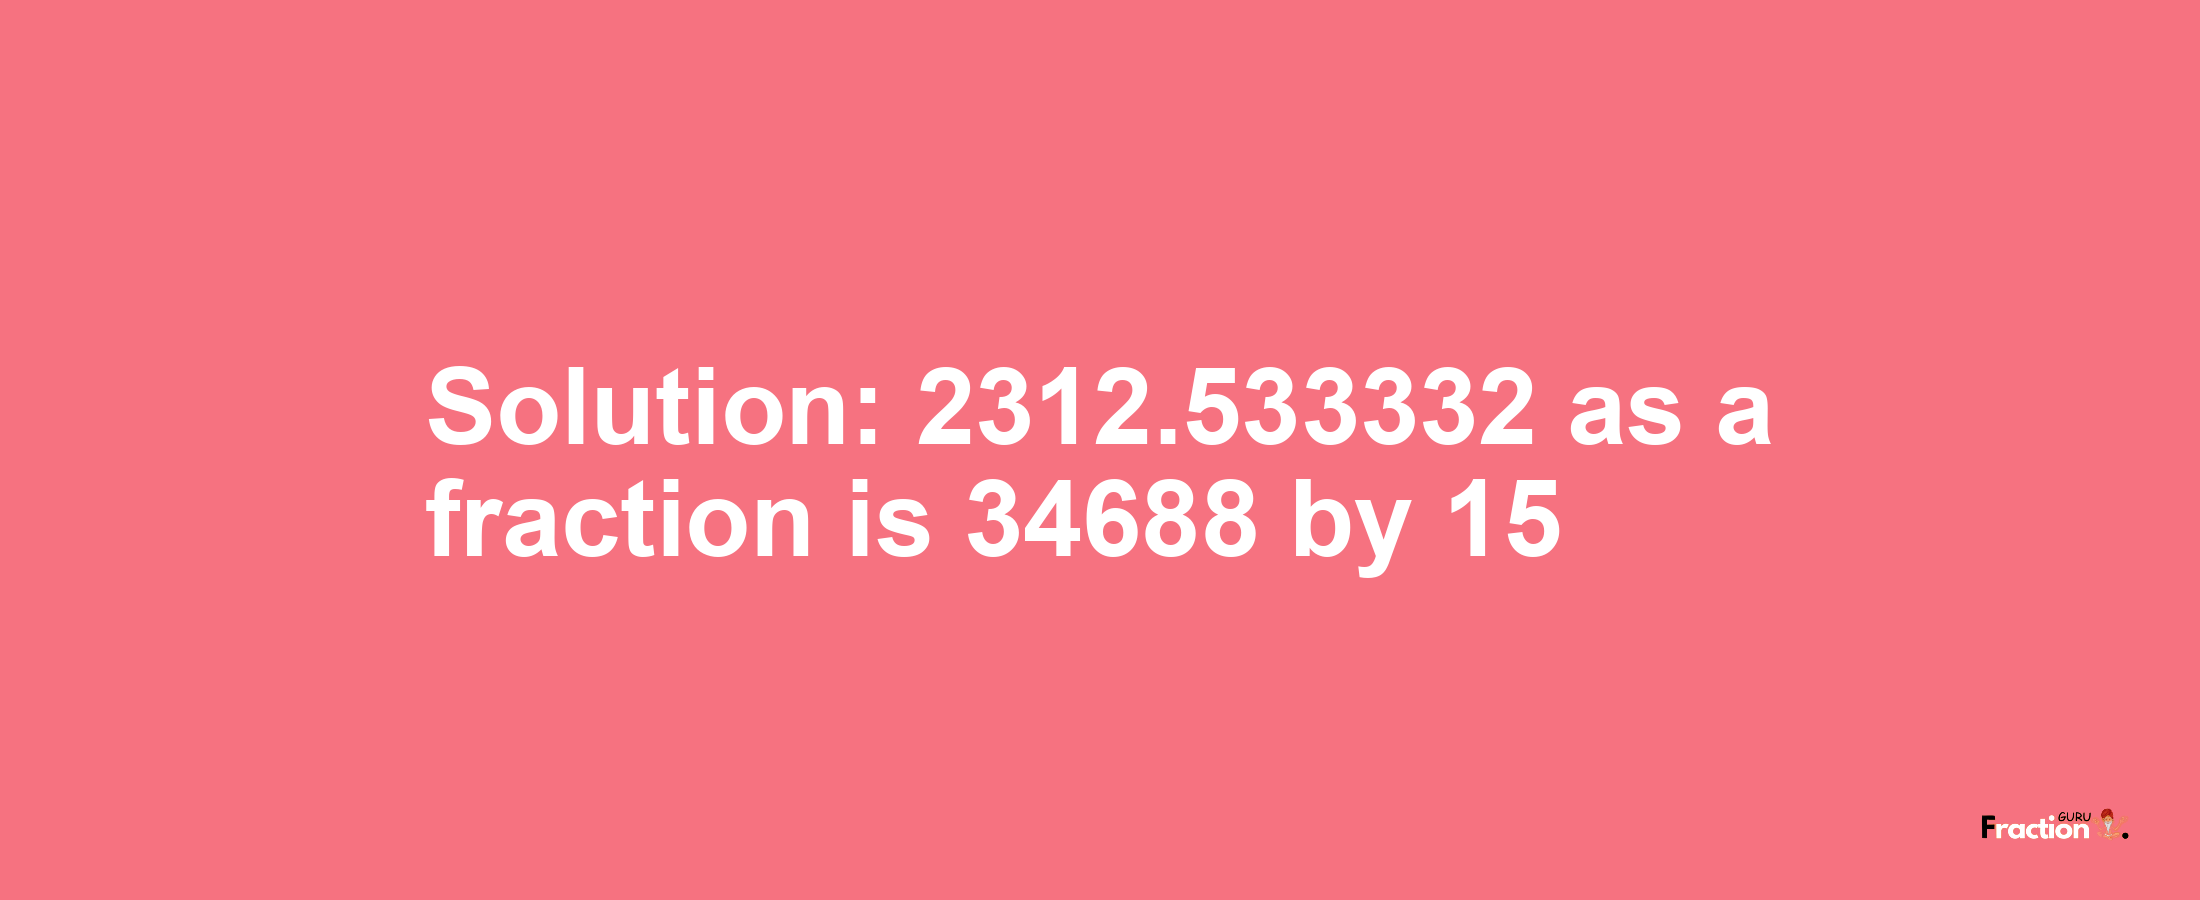 Solution:2312.533332 as a fraction is 34688/15